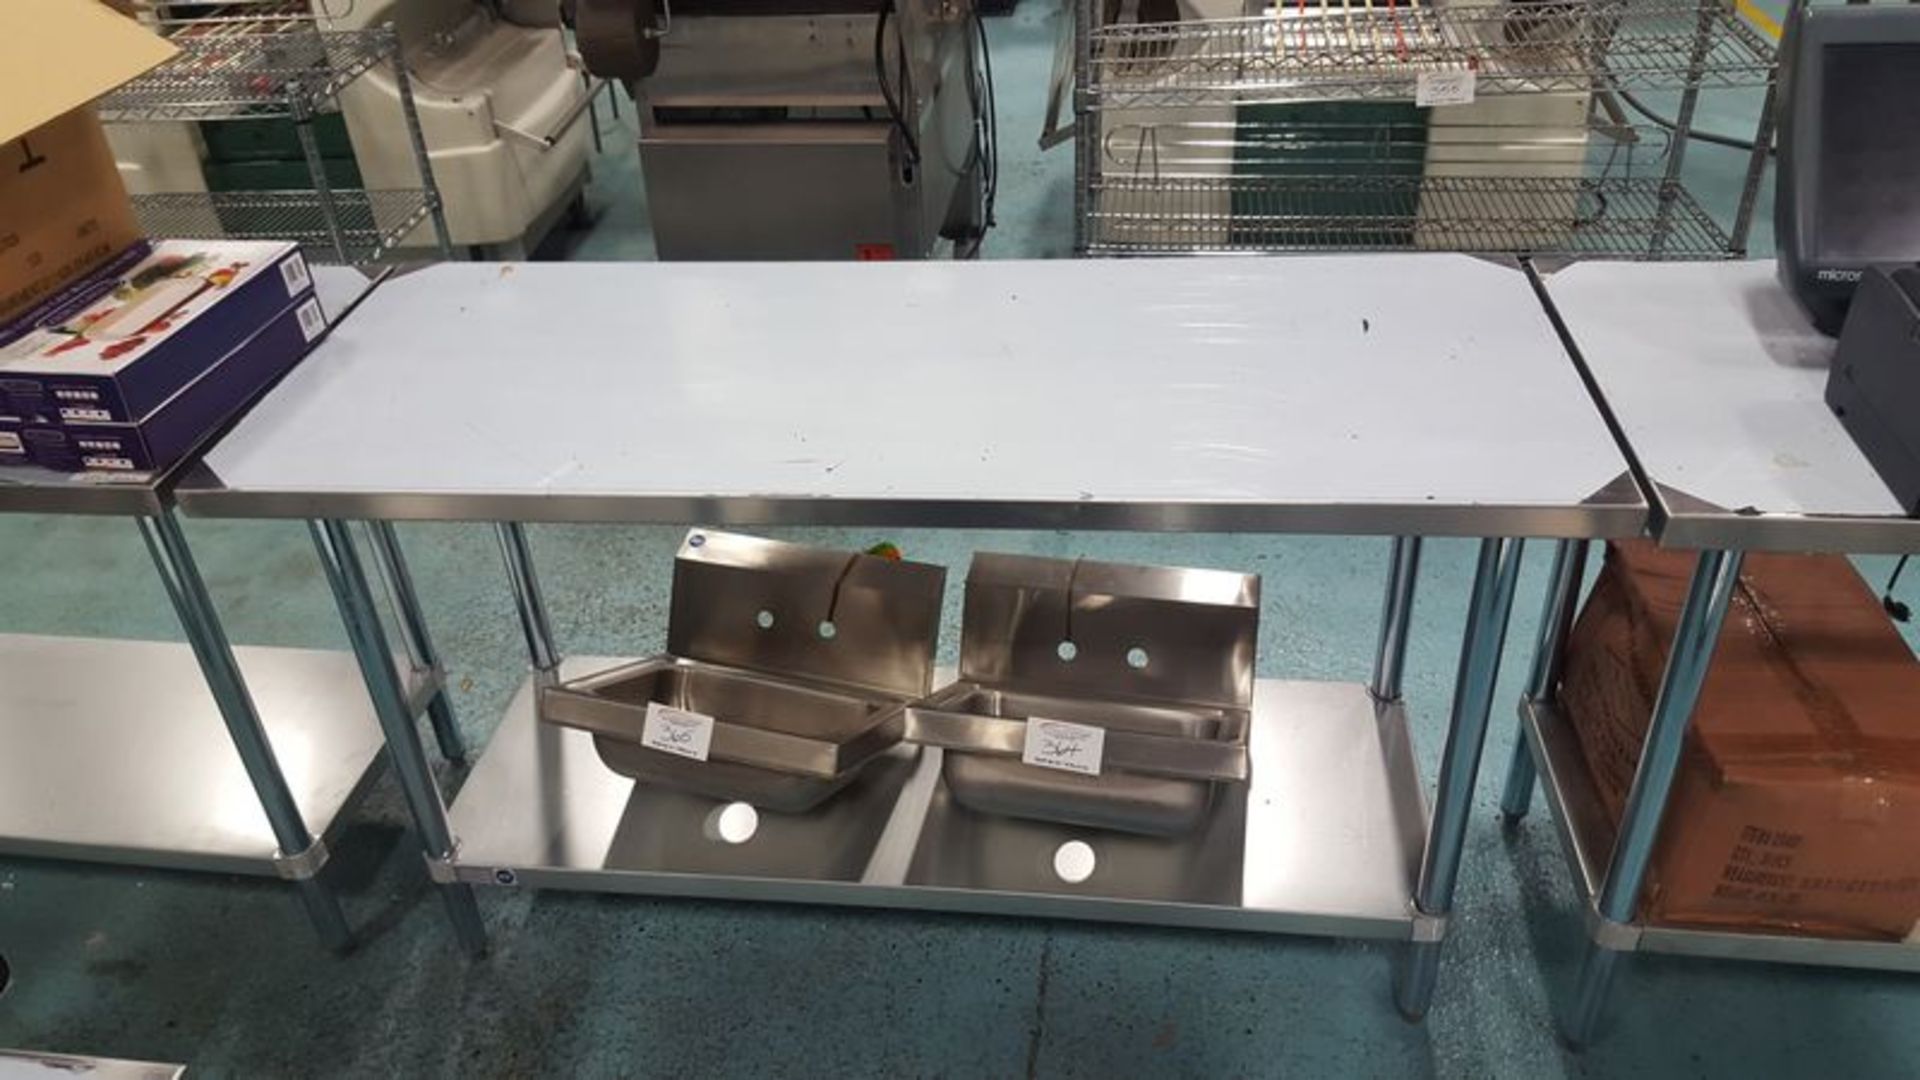 New in Box 24 x 60" - 2 Tier Stainless Steel Work Table